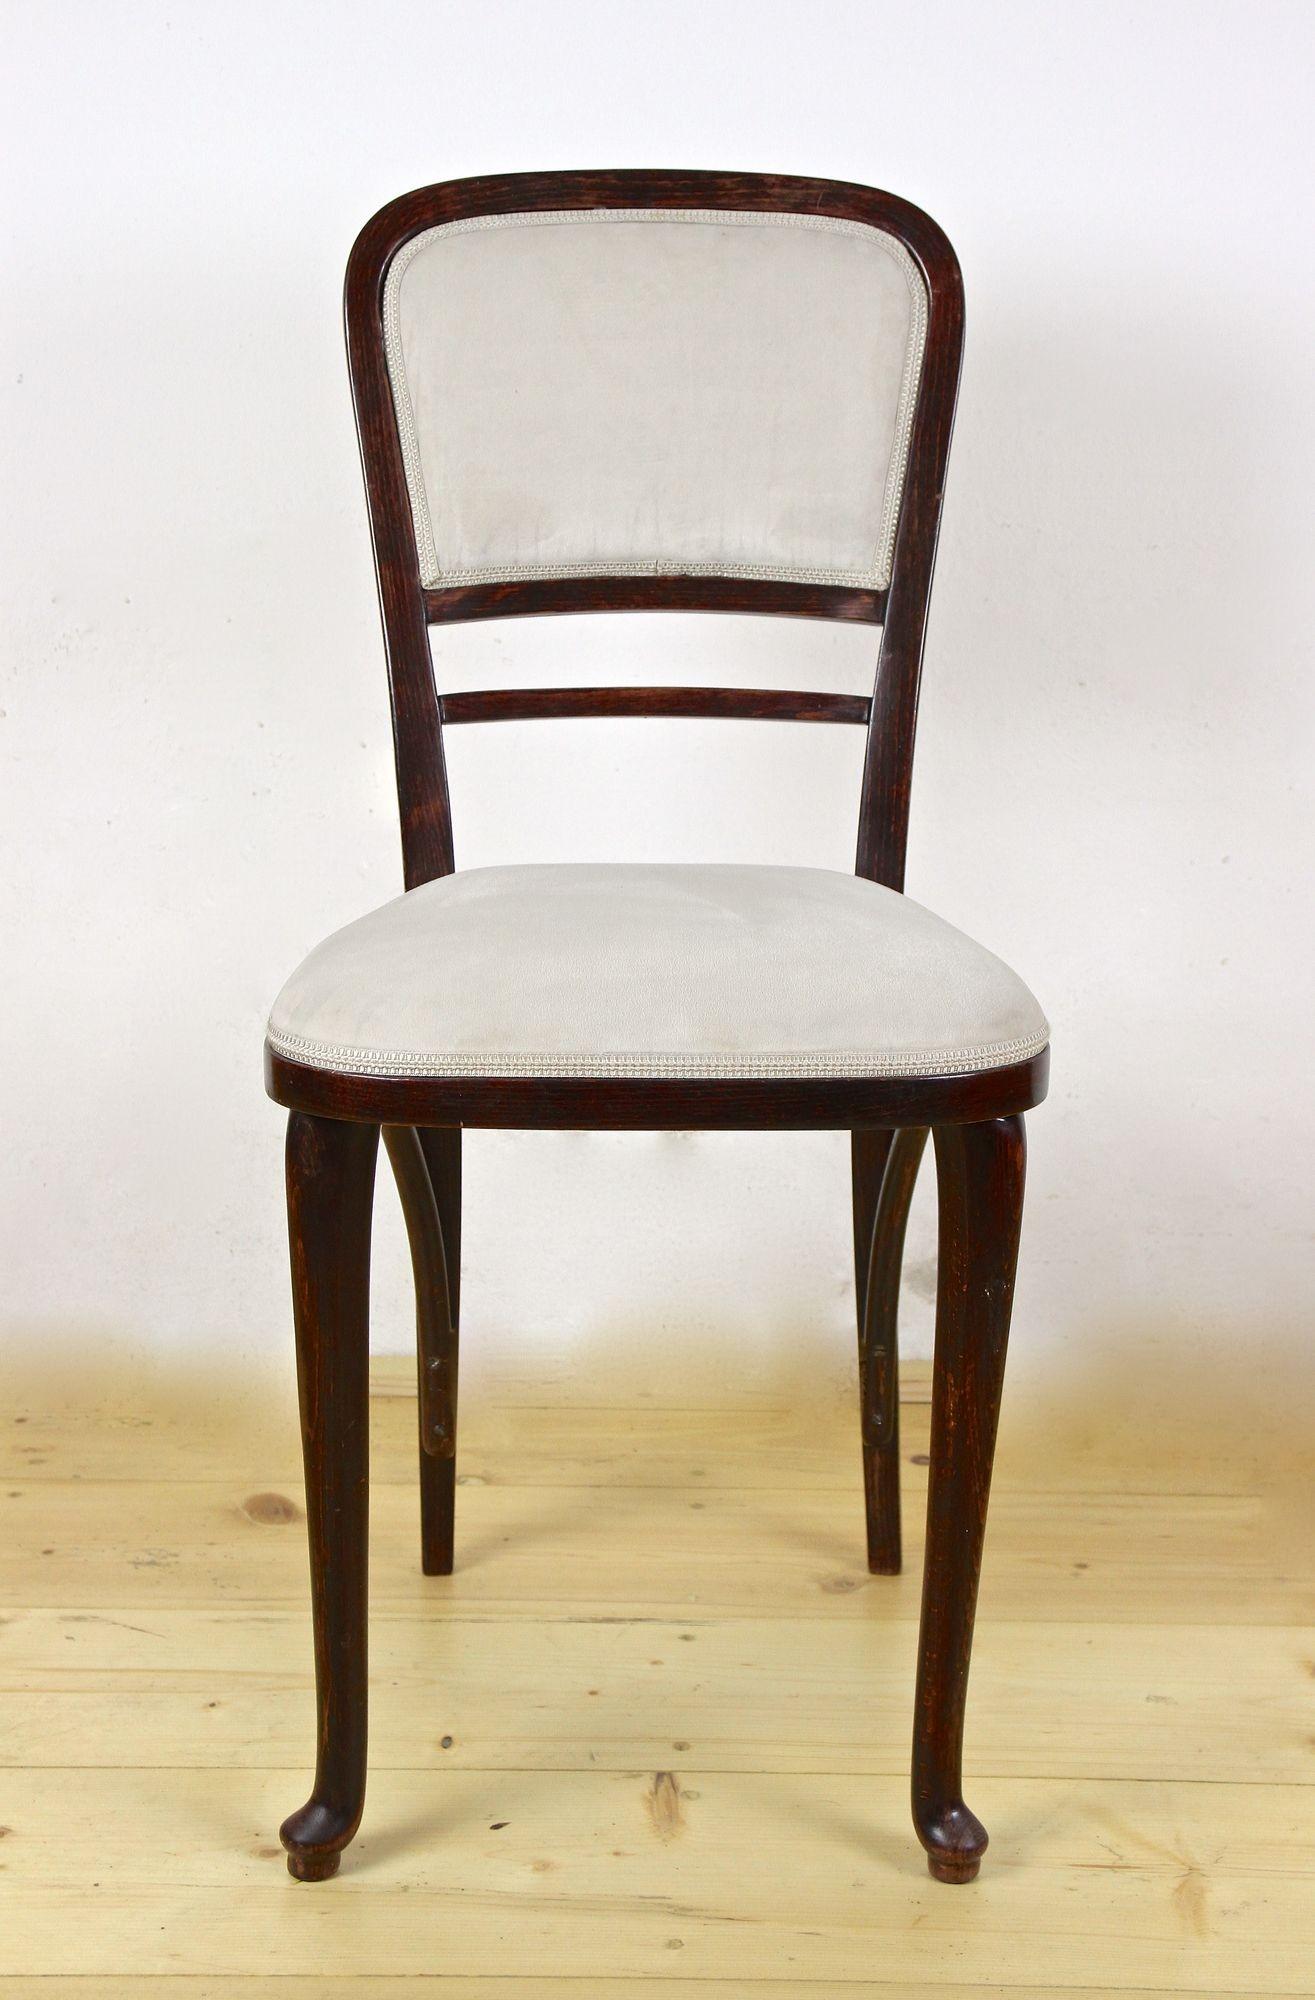 Exceptional Thonet bentwood chair from the Art Nouveau period around 1905 in Vienna/ Austria. Designed by none other than the famous Austrian architect and painter Marcel Kammerer (1878 - 1959) this unique chair was produced by the most famous